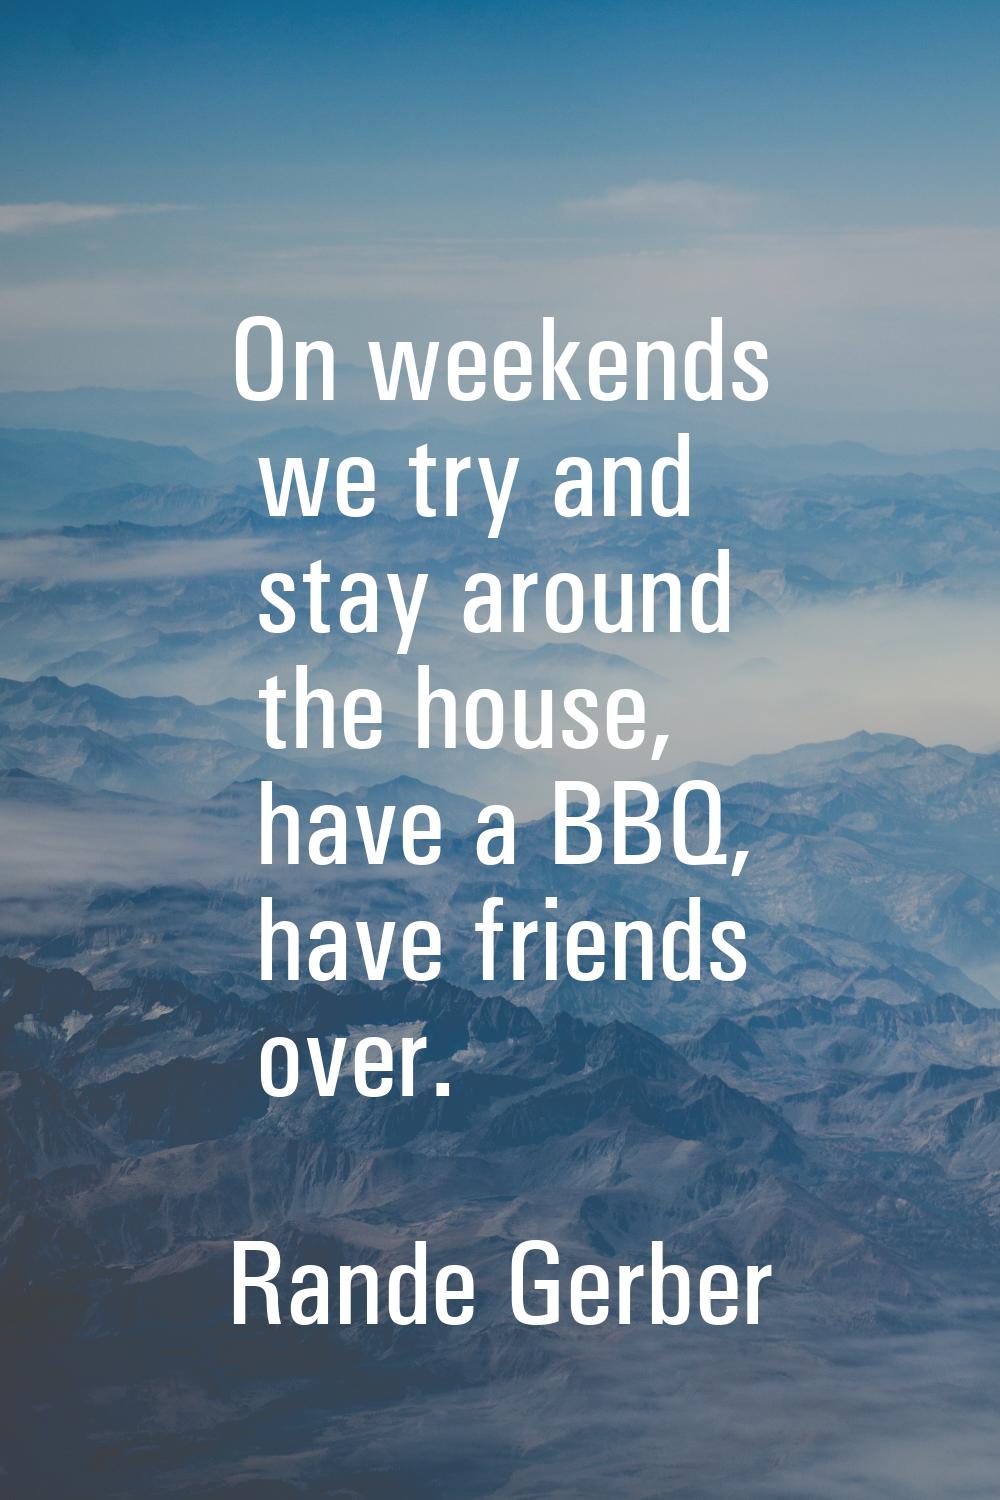 On weekends we try and stay around the house, have a BBQ, have friends over.